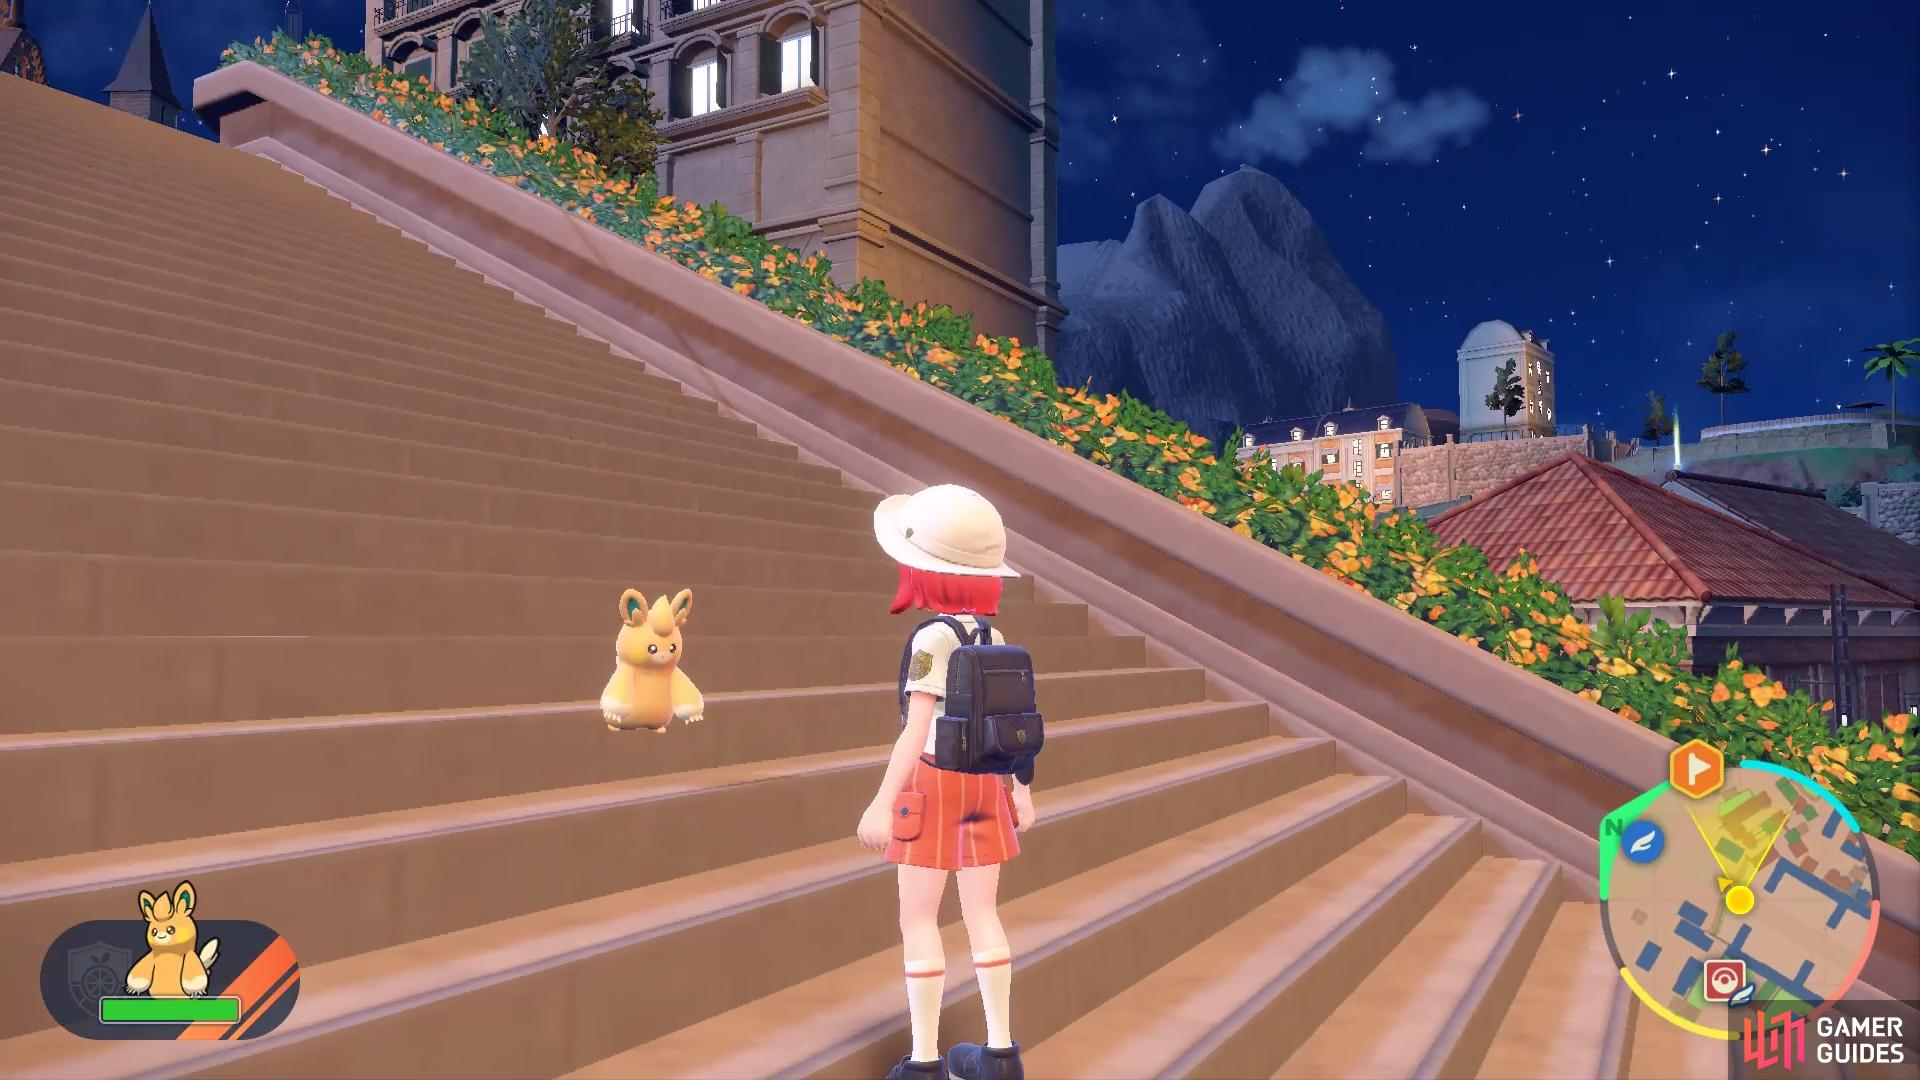 Take your Pawmo for walkies using the Let’s Go feature!